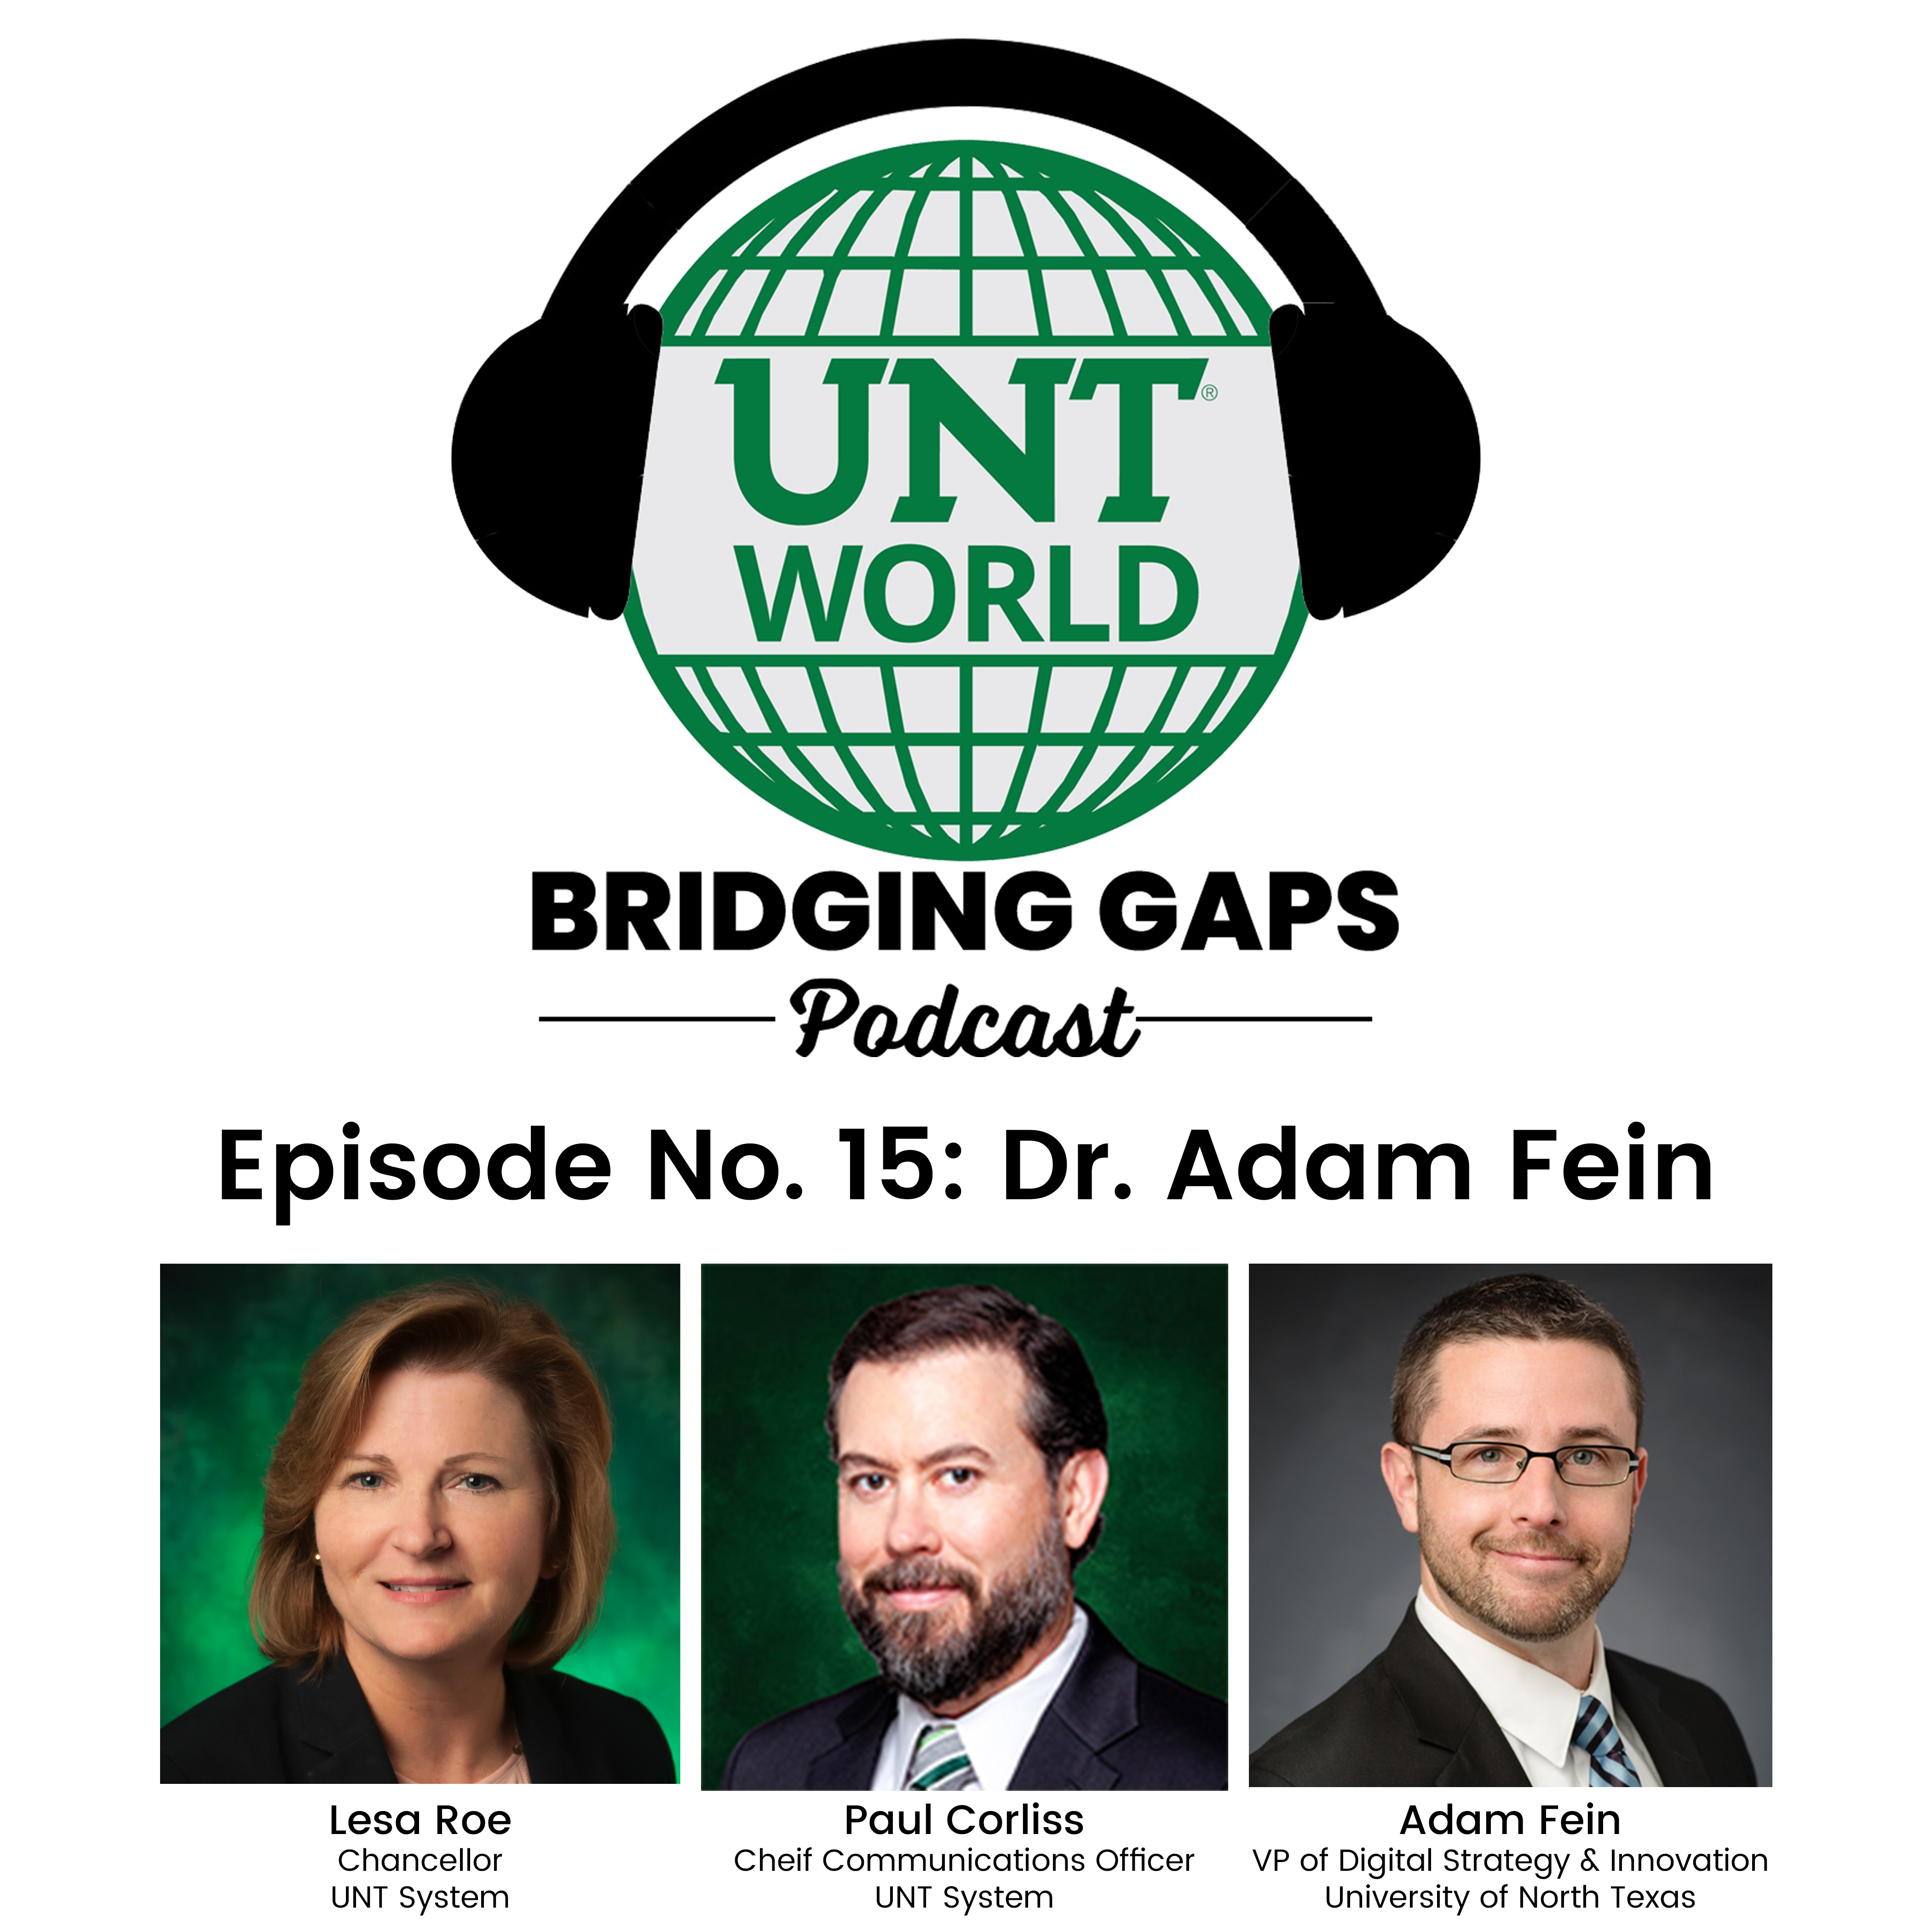 Adam Fein, Vice President for Digital Strategy and Innovation at UNT on the Bridging Gaps Podcast